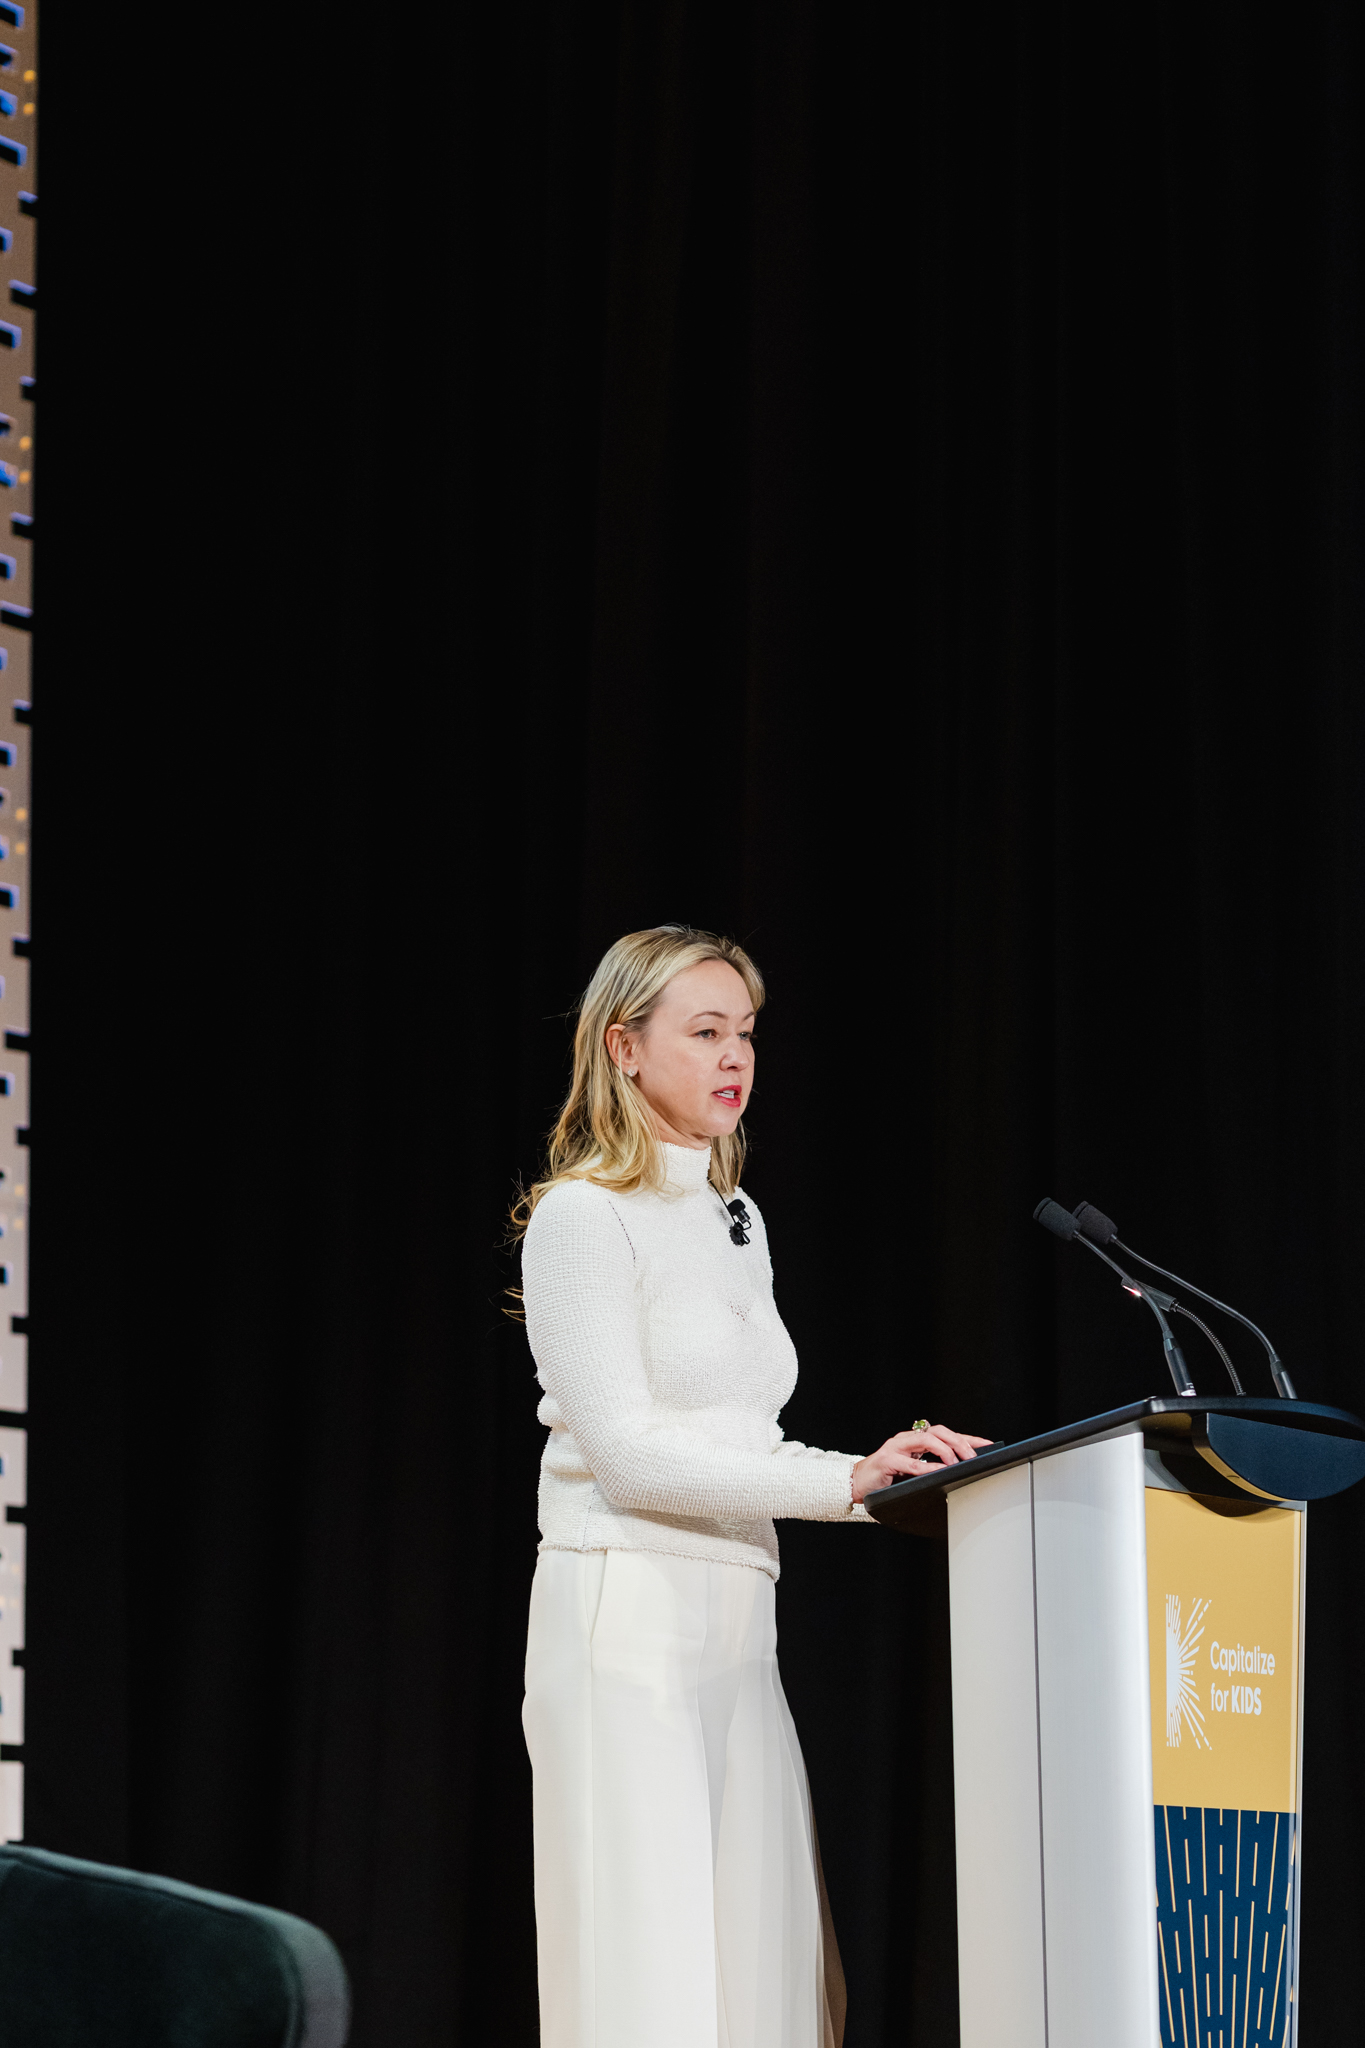 A woman delivering a speech at a conference, confidently standing at a podium.